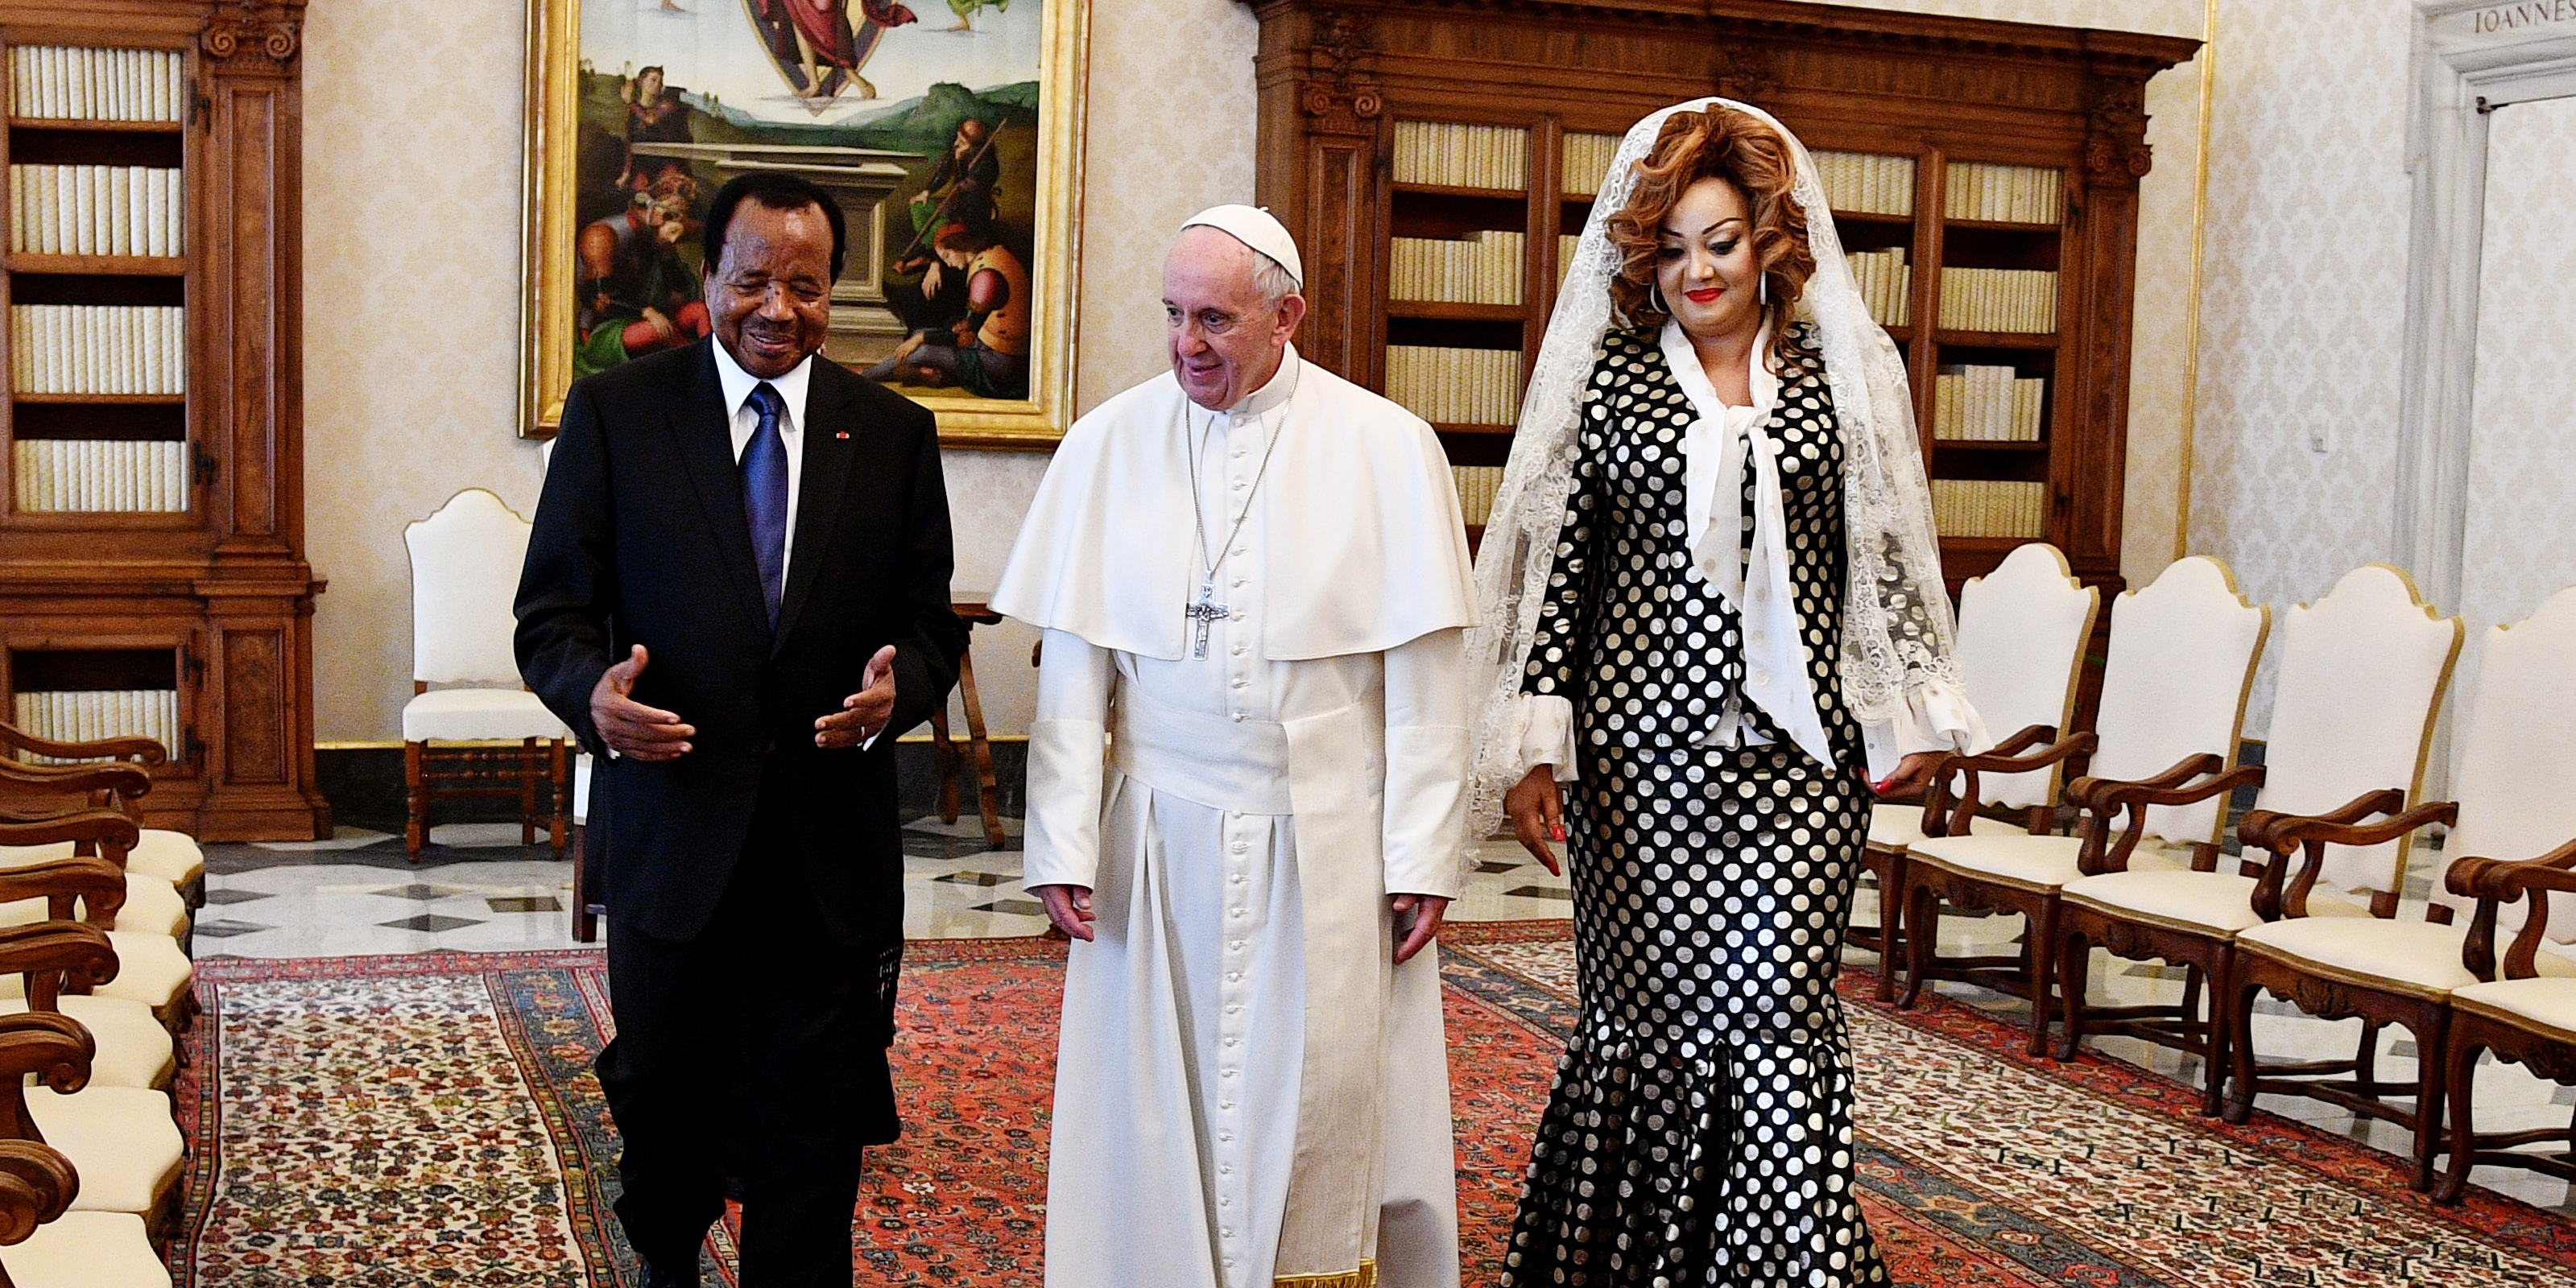 CAMEROON PRESIDENT POPE